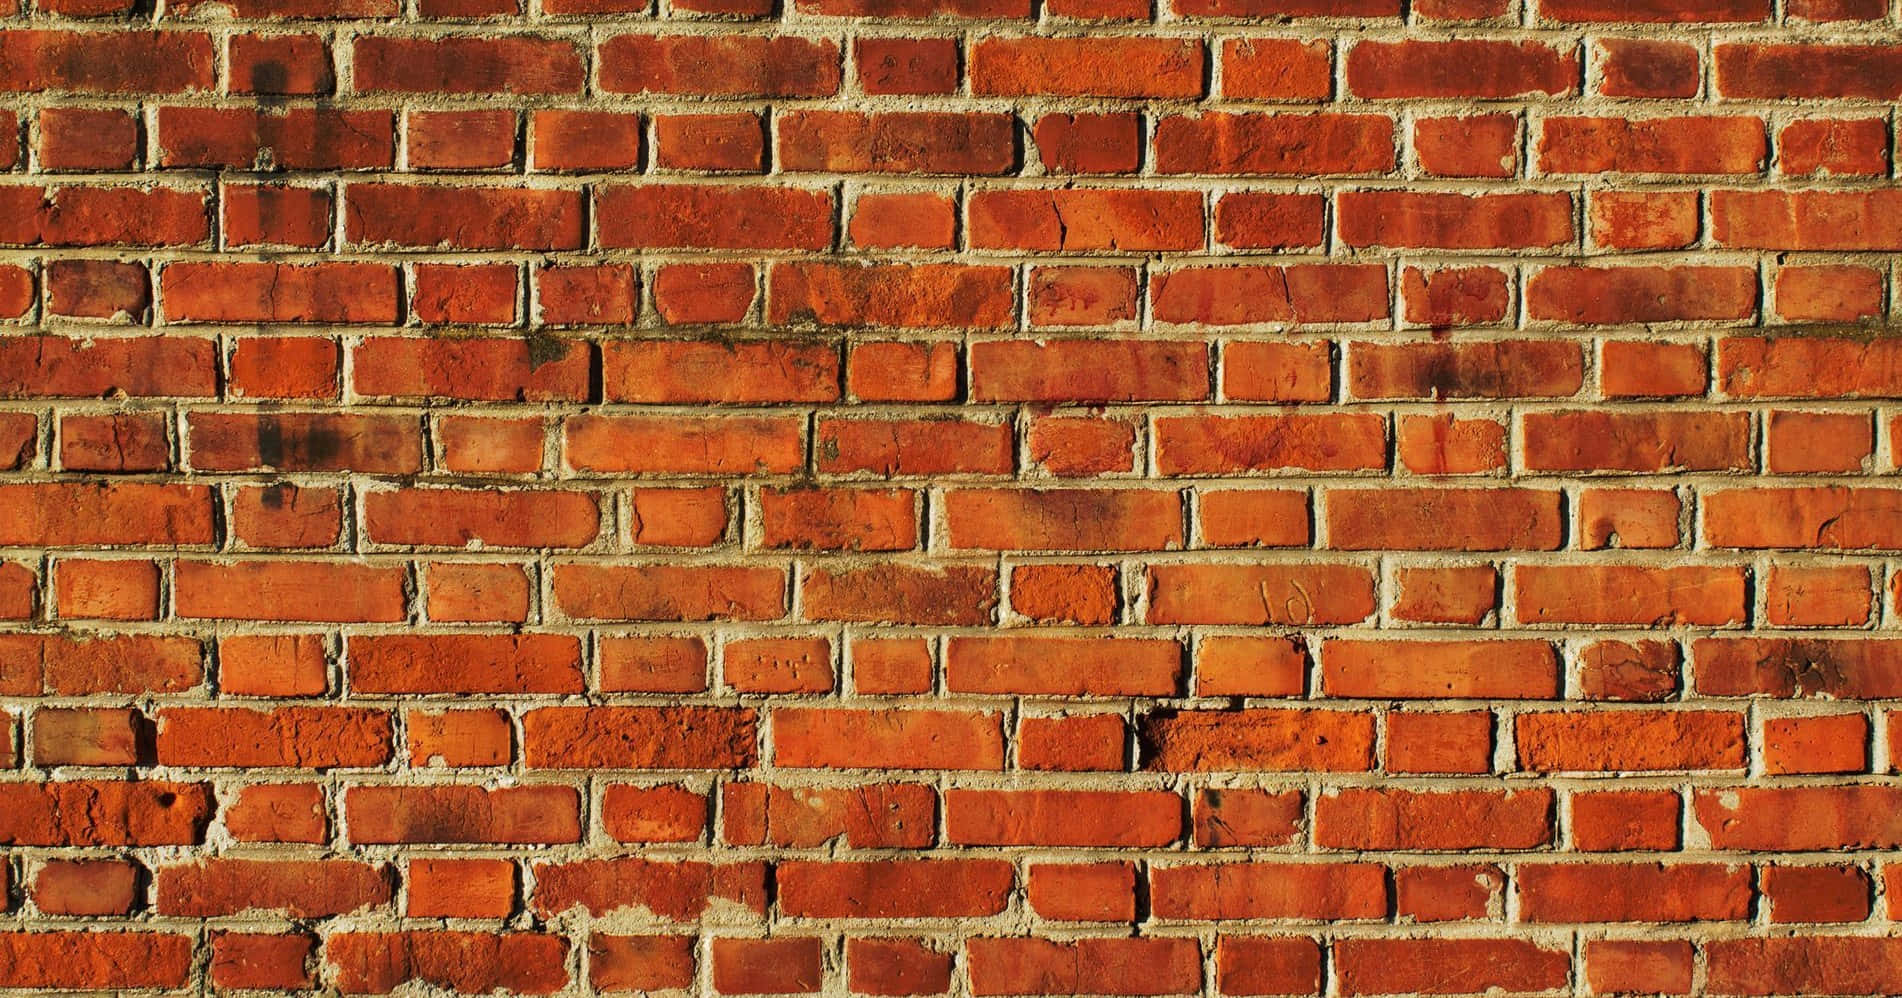 Brick background with textured grout lines